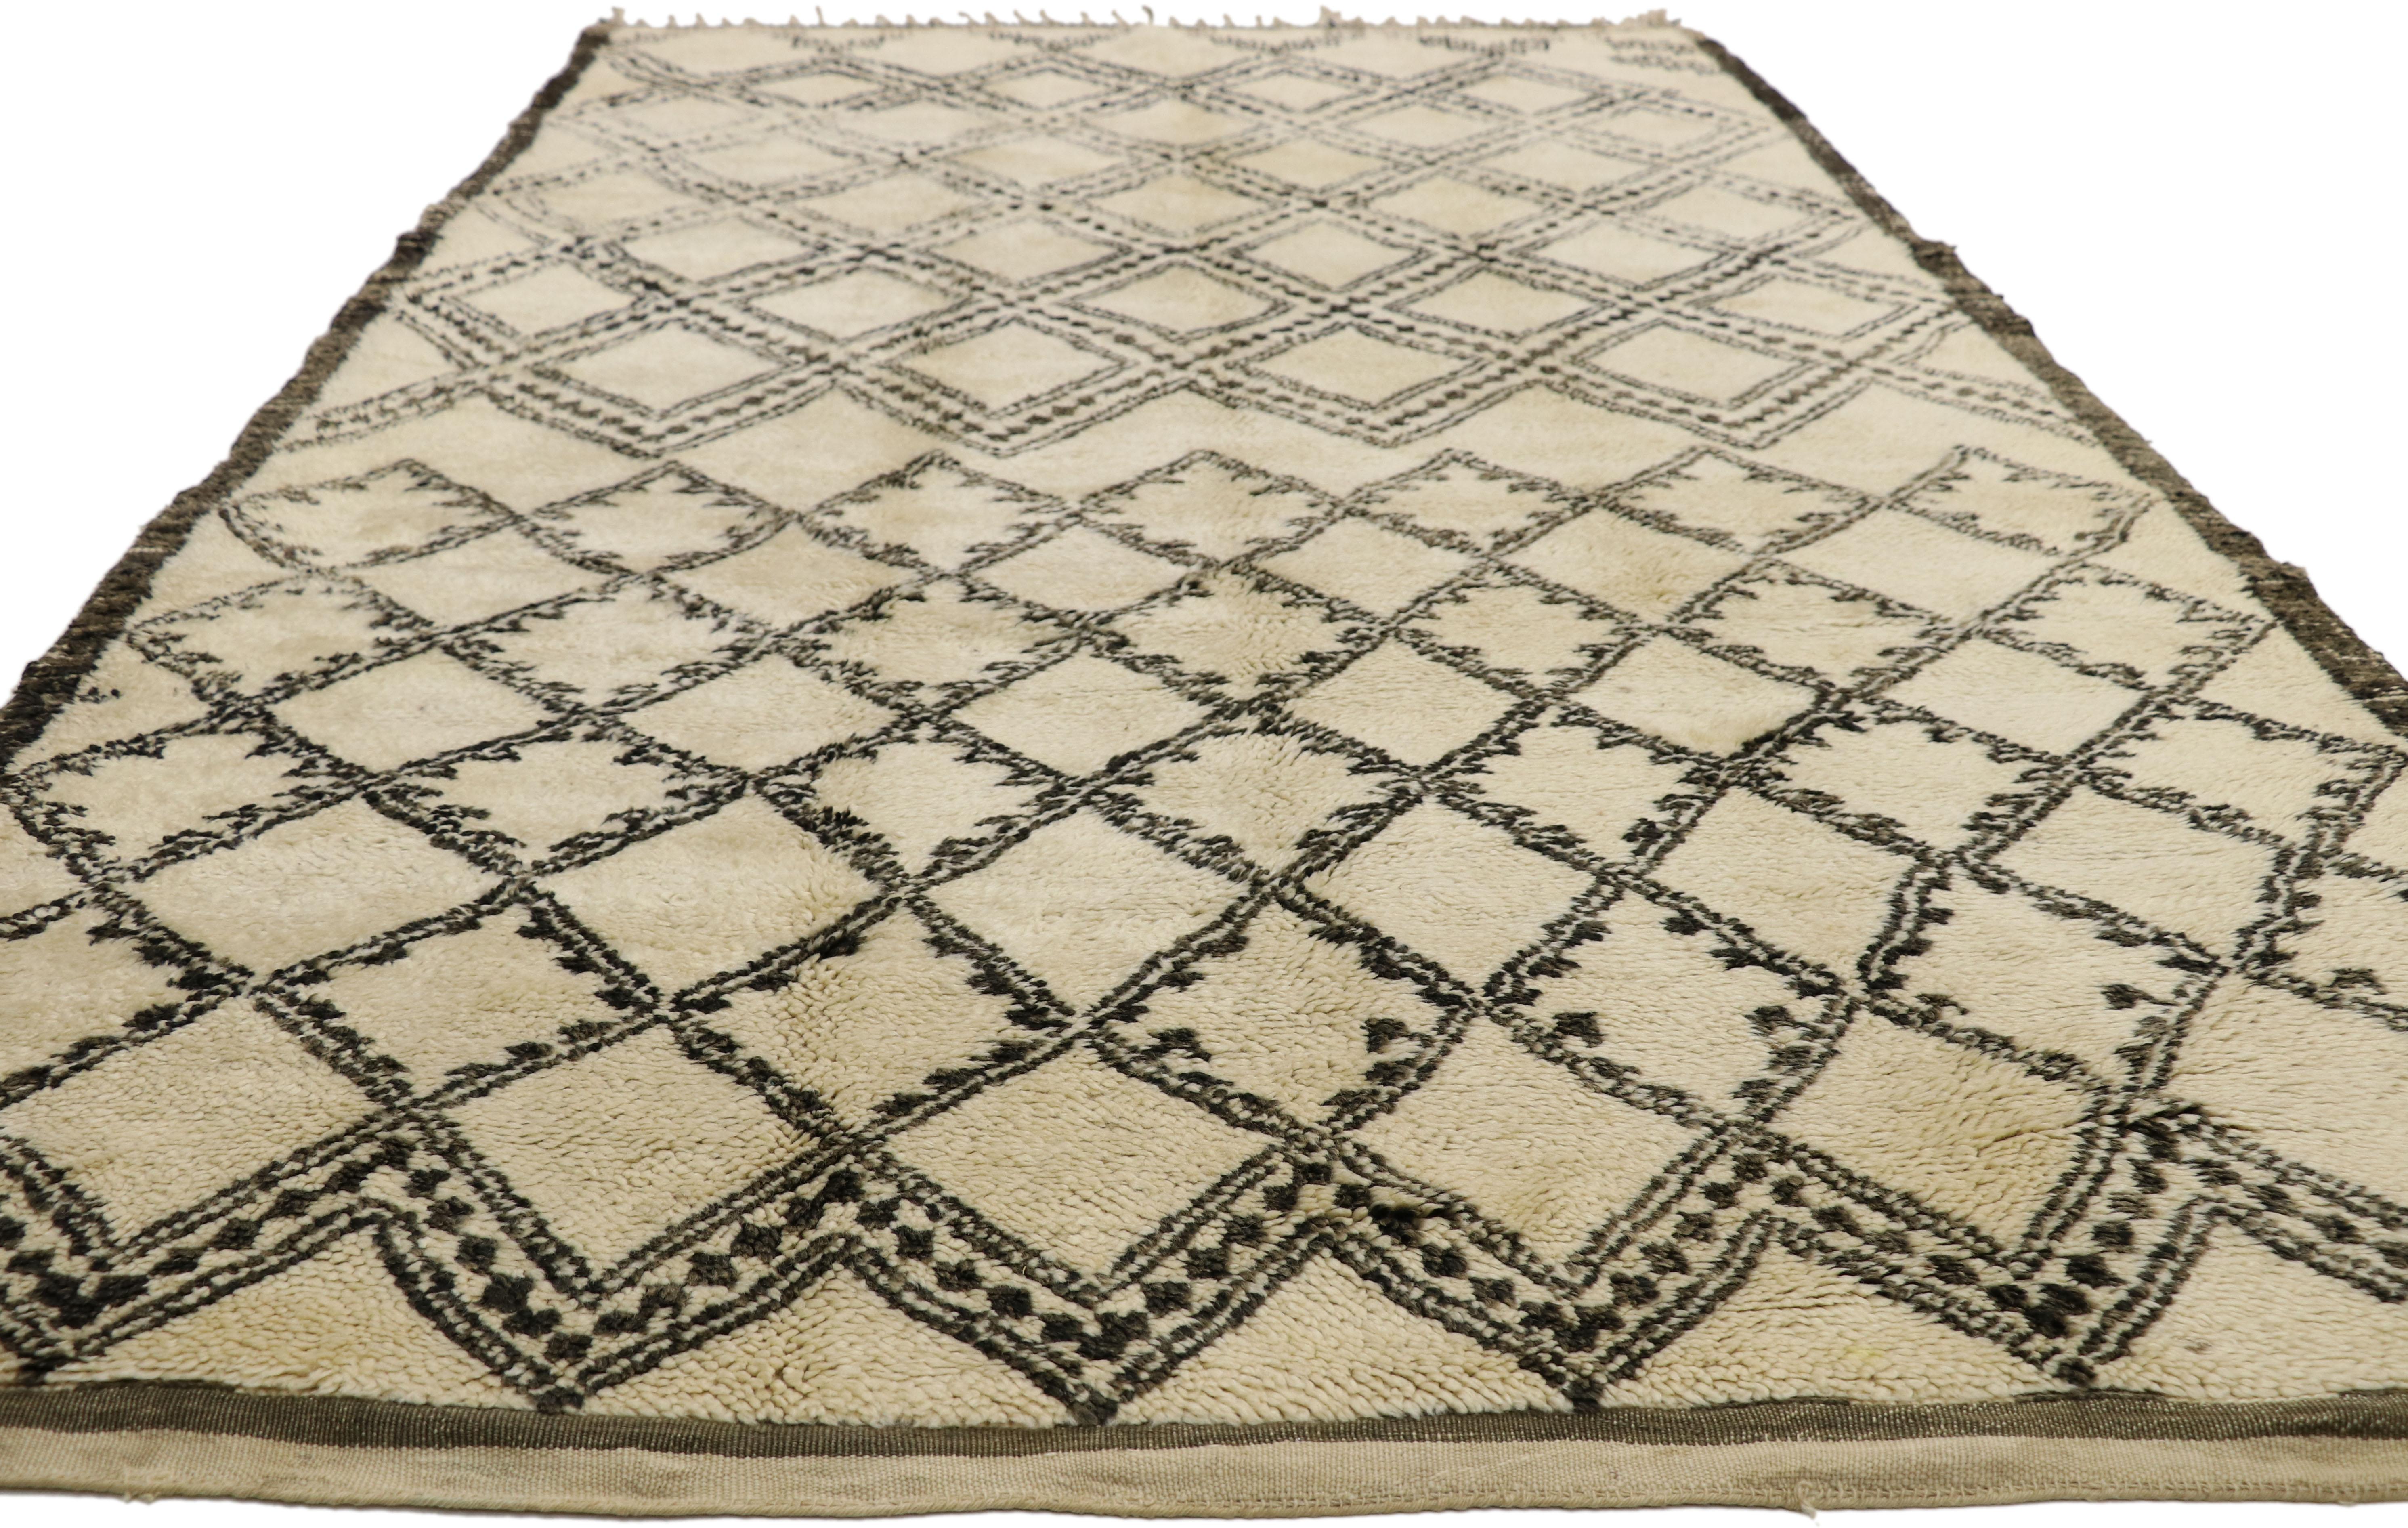 Hand-Knotted Vintage Beni Ourain Rug, Berber Moroccan Rug with Mid-Century Modern Style